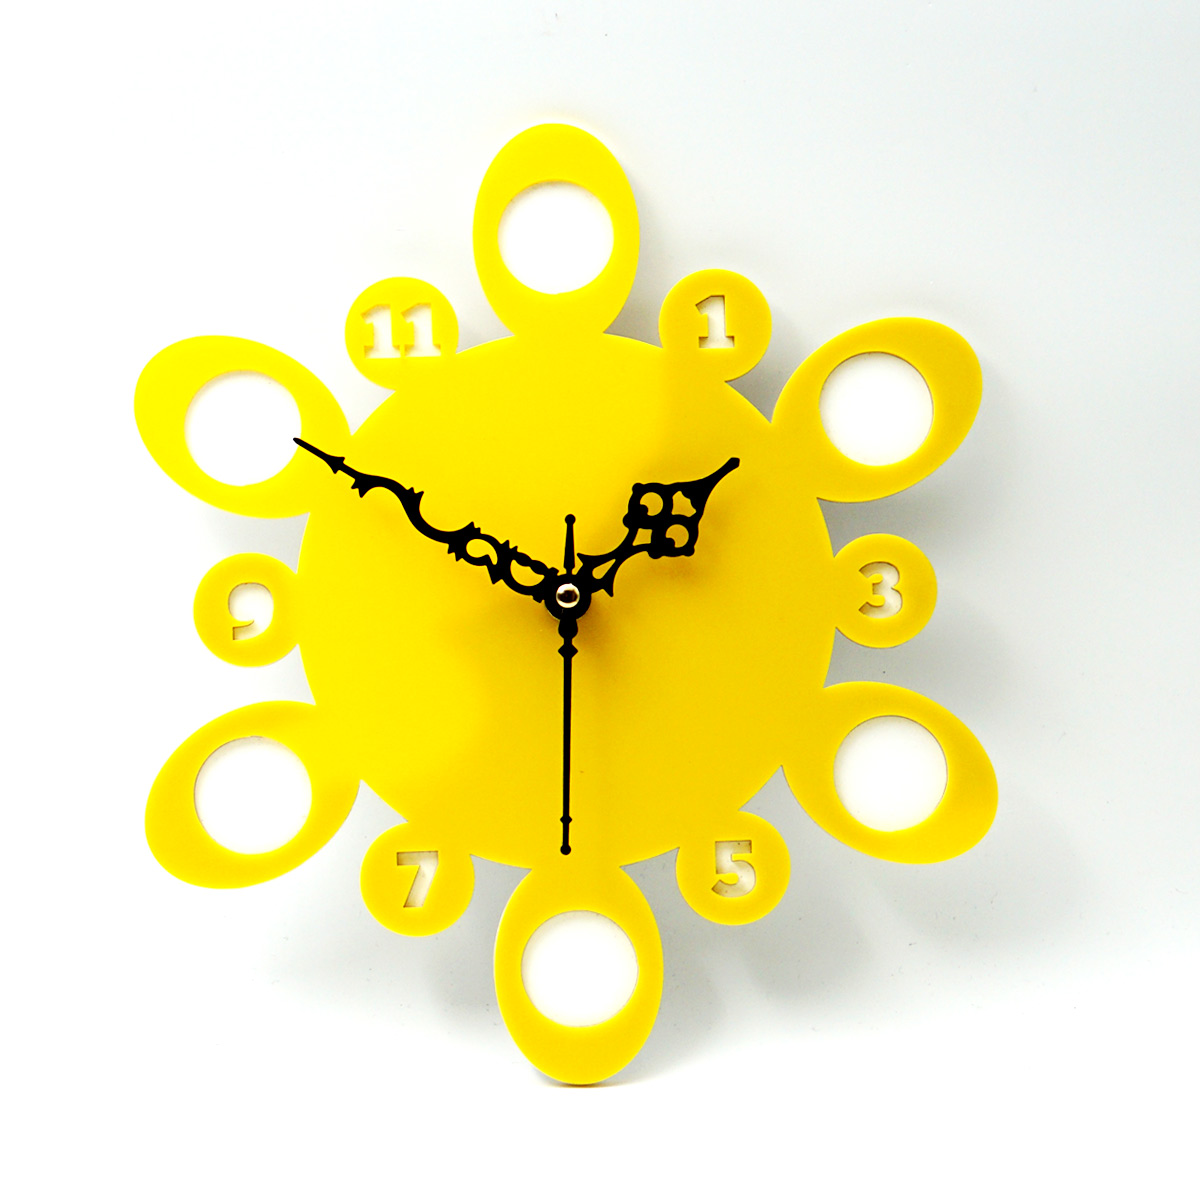 penhouse.in Customizable Acrylic Yellow With White Color Round Shape Wall Clock 250mm X 250mm SKU ACC047